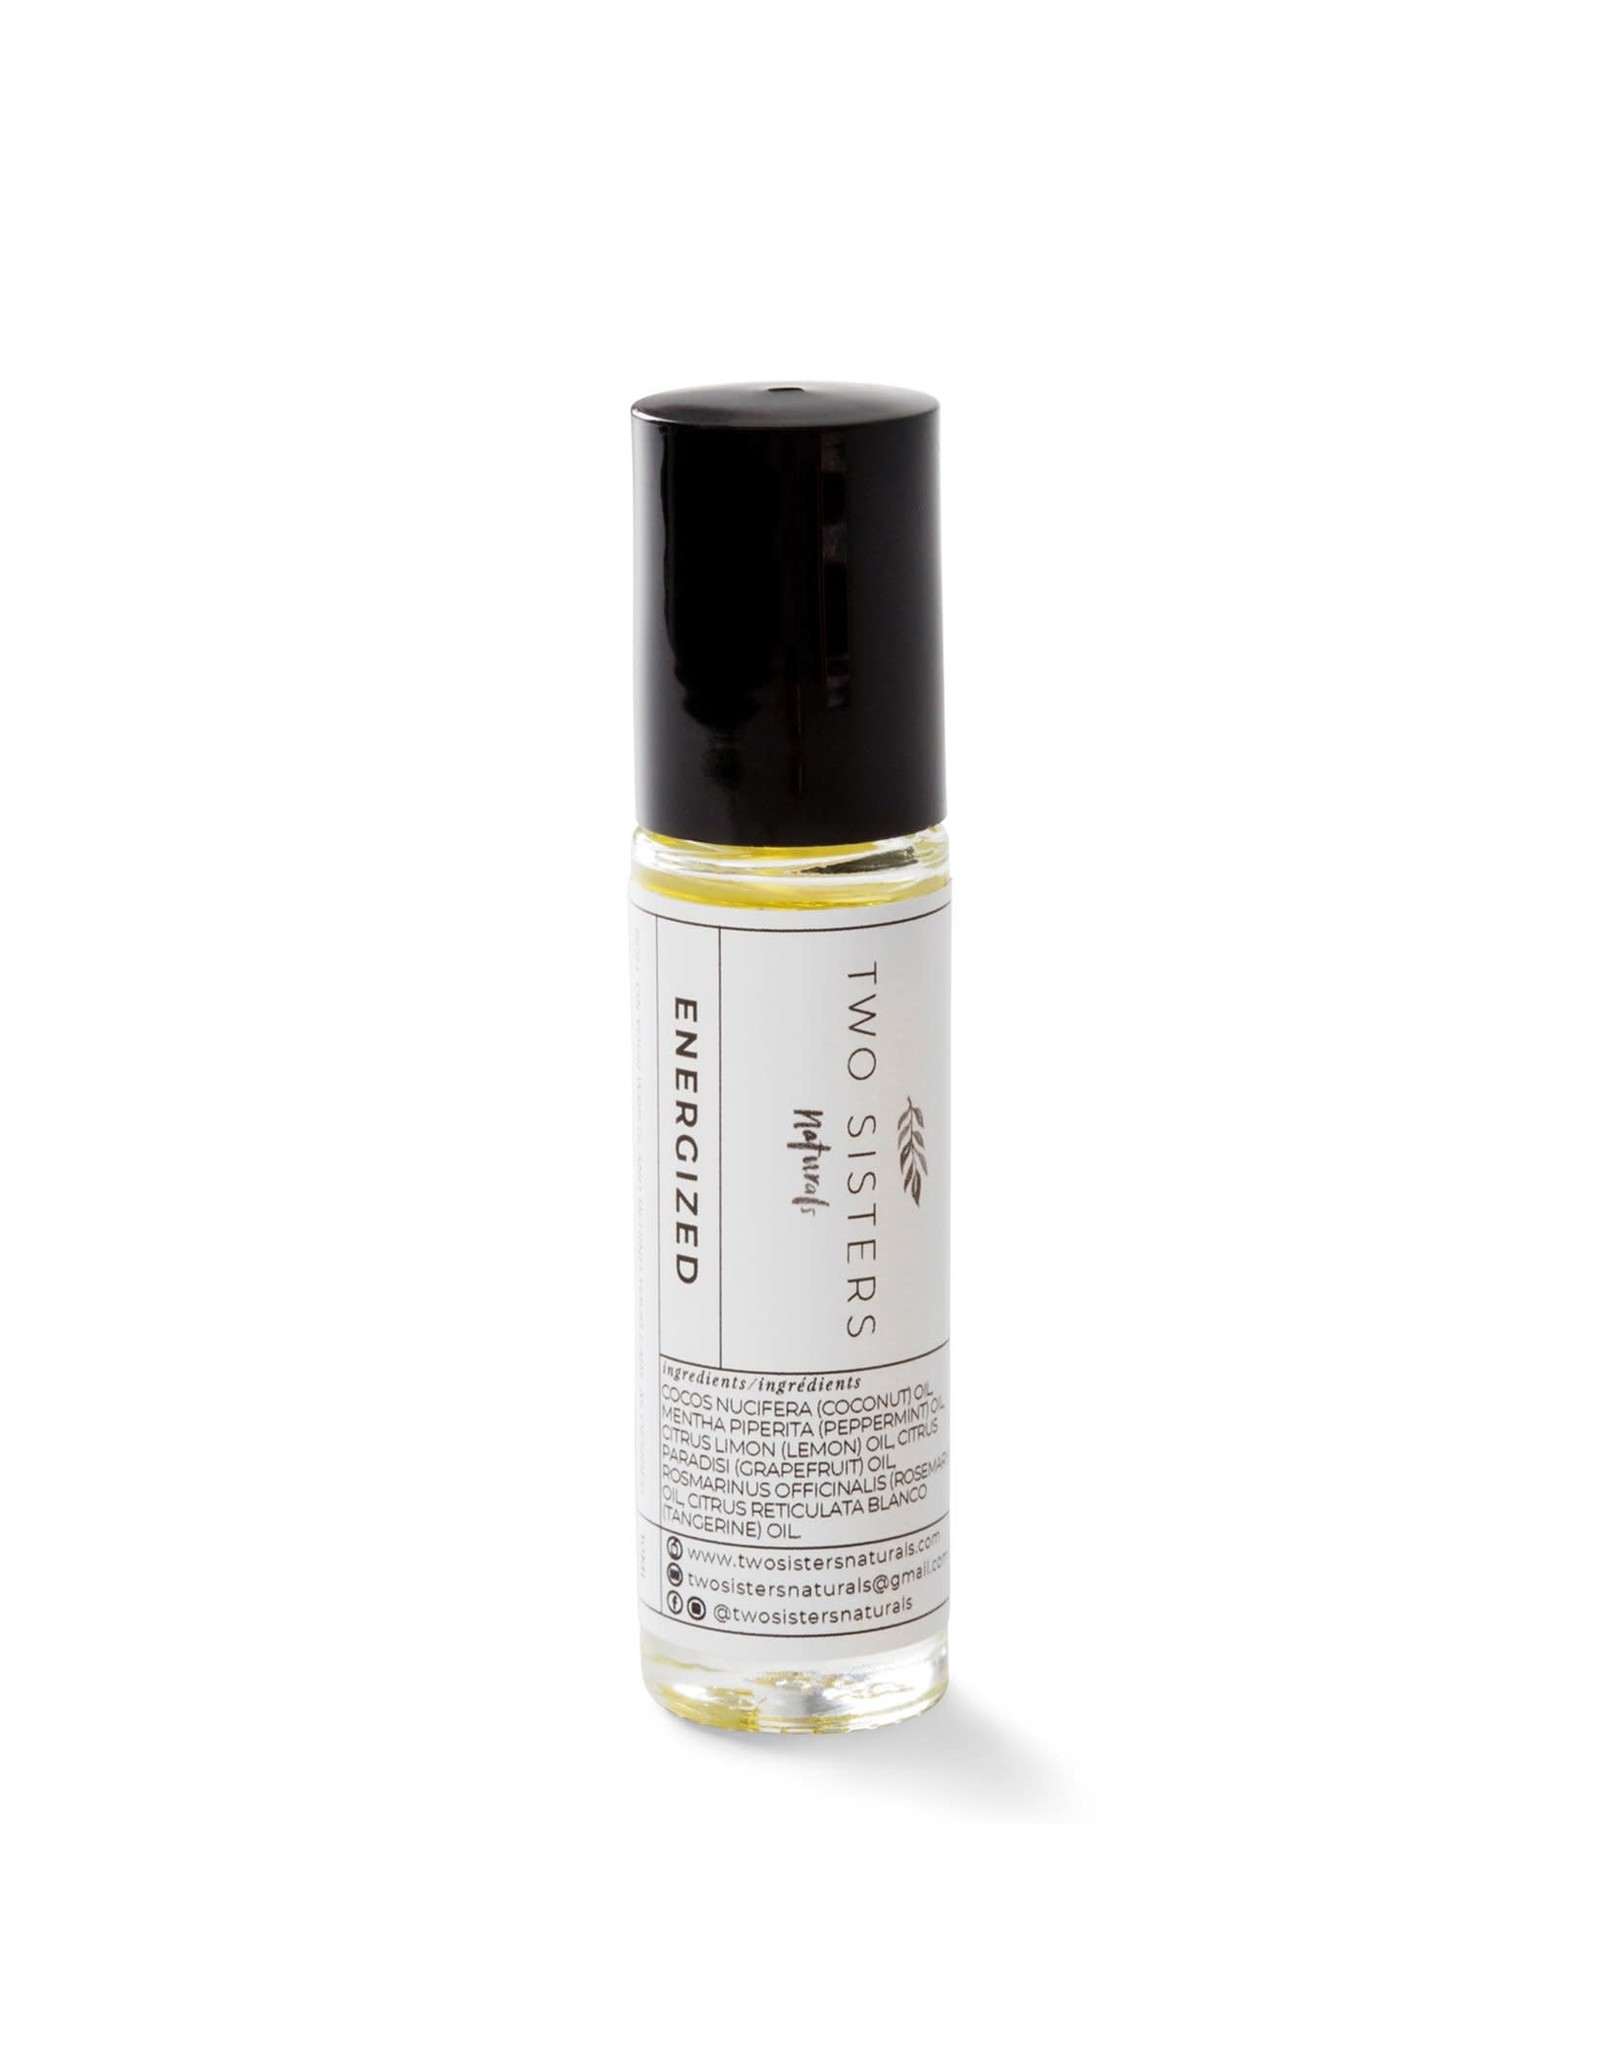 Two Sisters Naturals Aromatherapy Roller